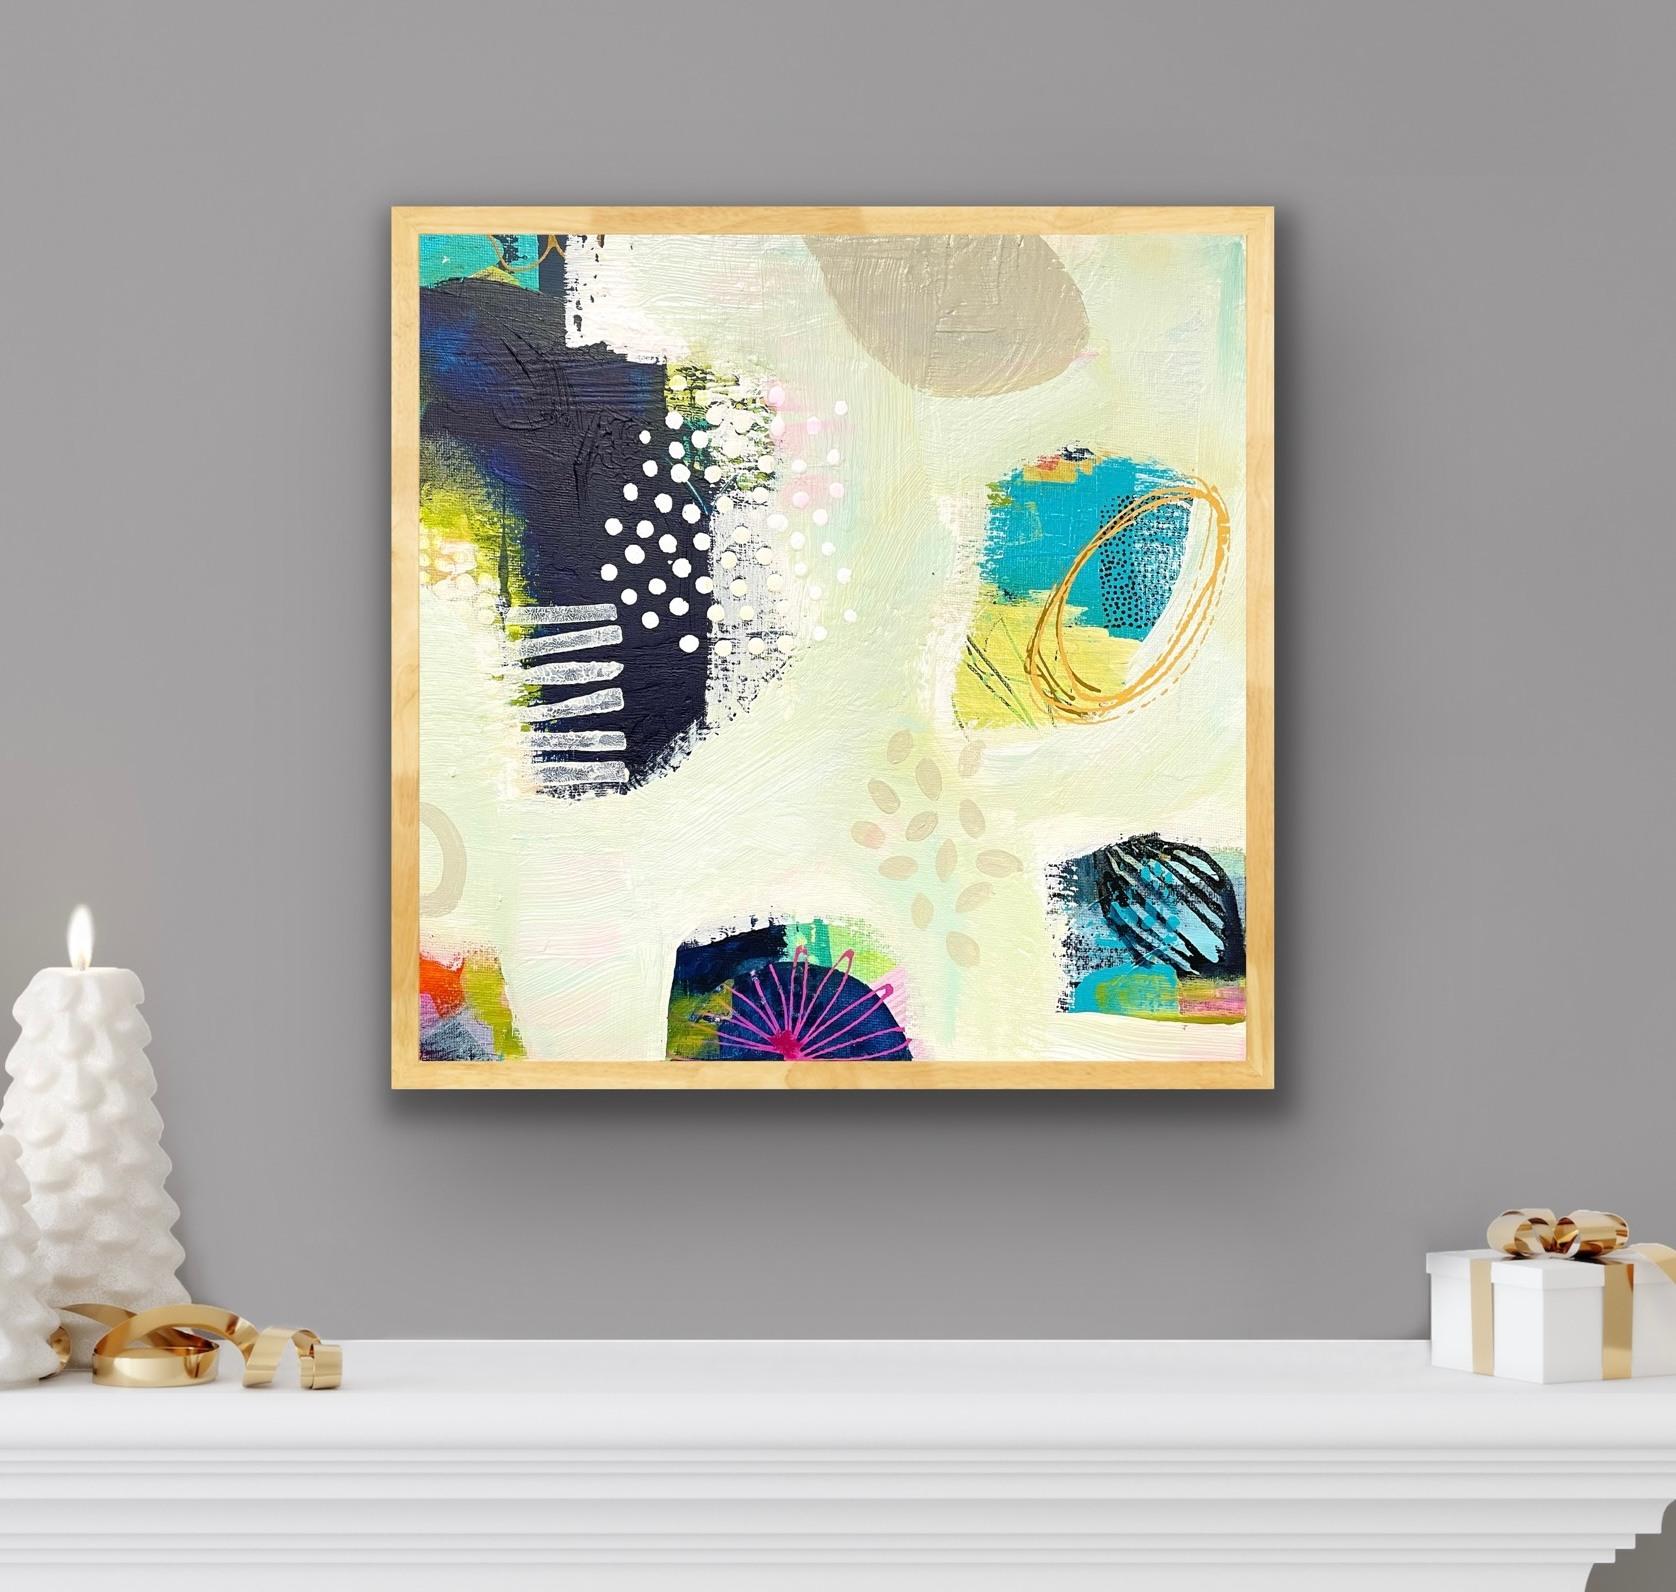 Above and Beyond, Statement Abstract Expressionist Painting, Original Framed Art - Beige Landscape Painting by Alison Gilbert